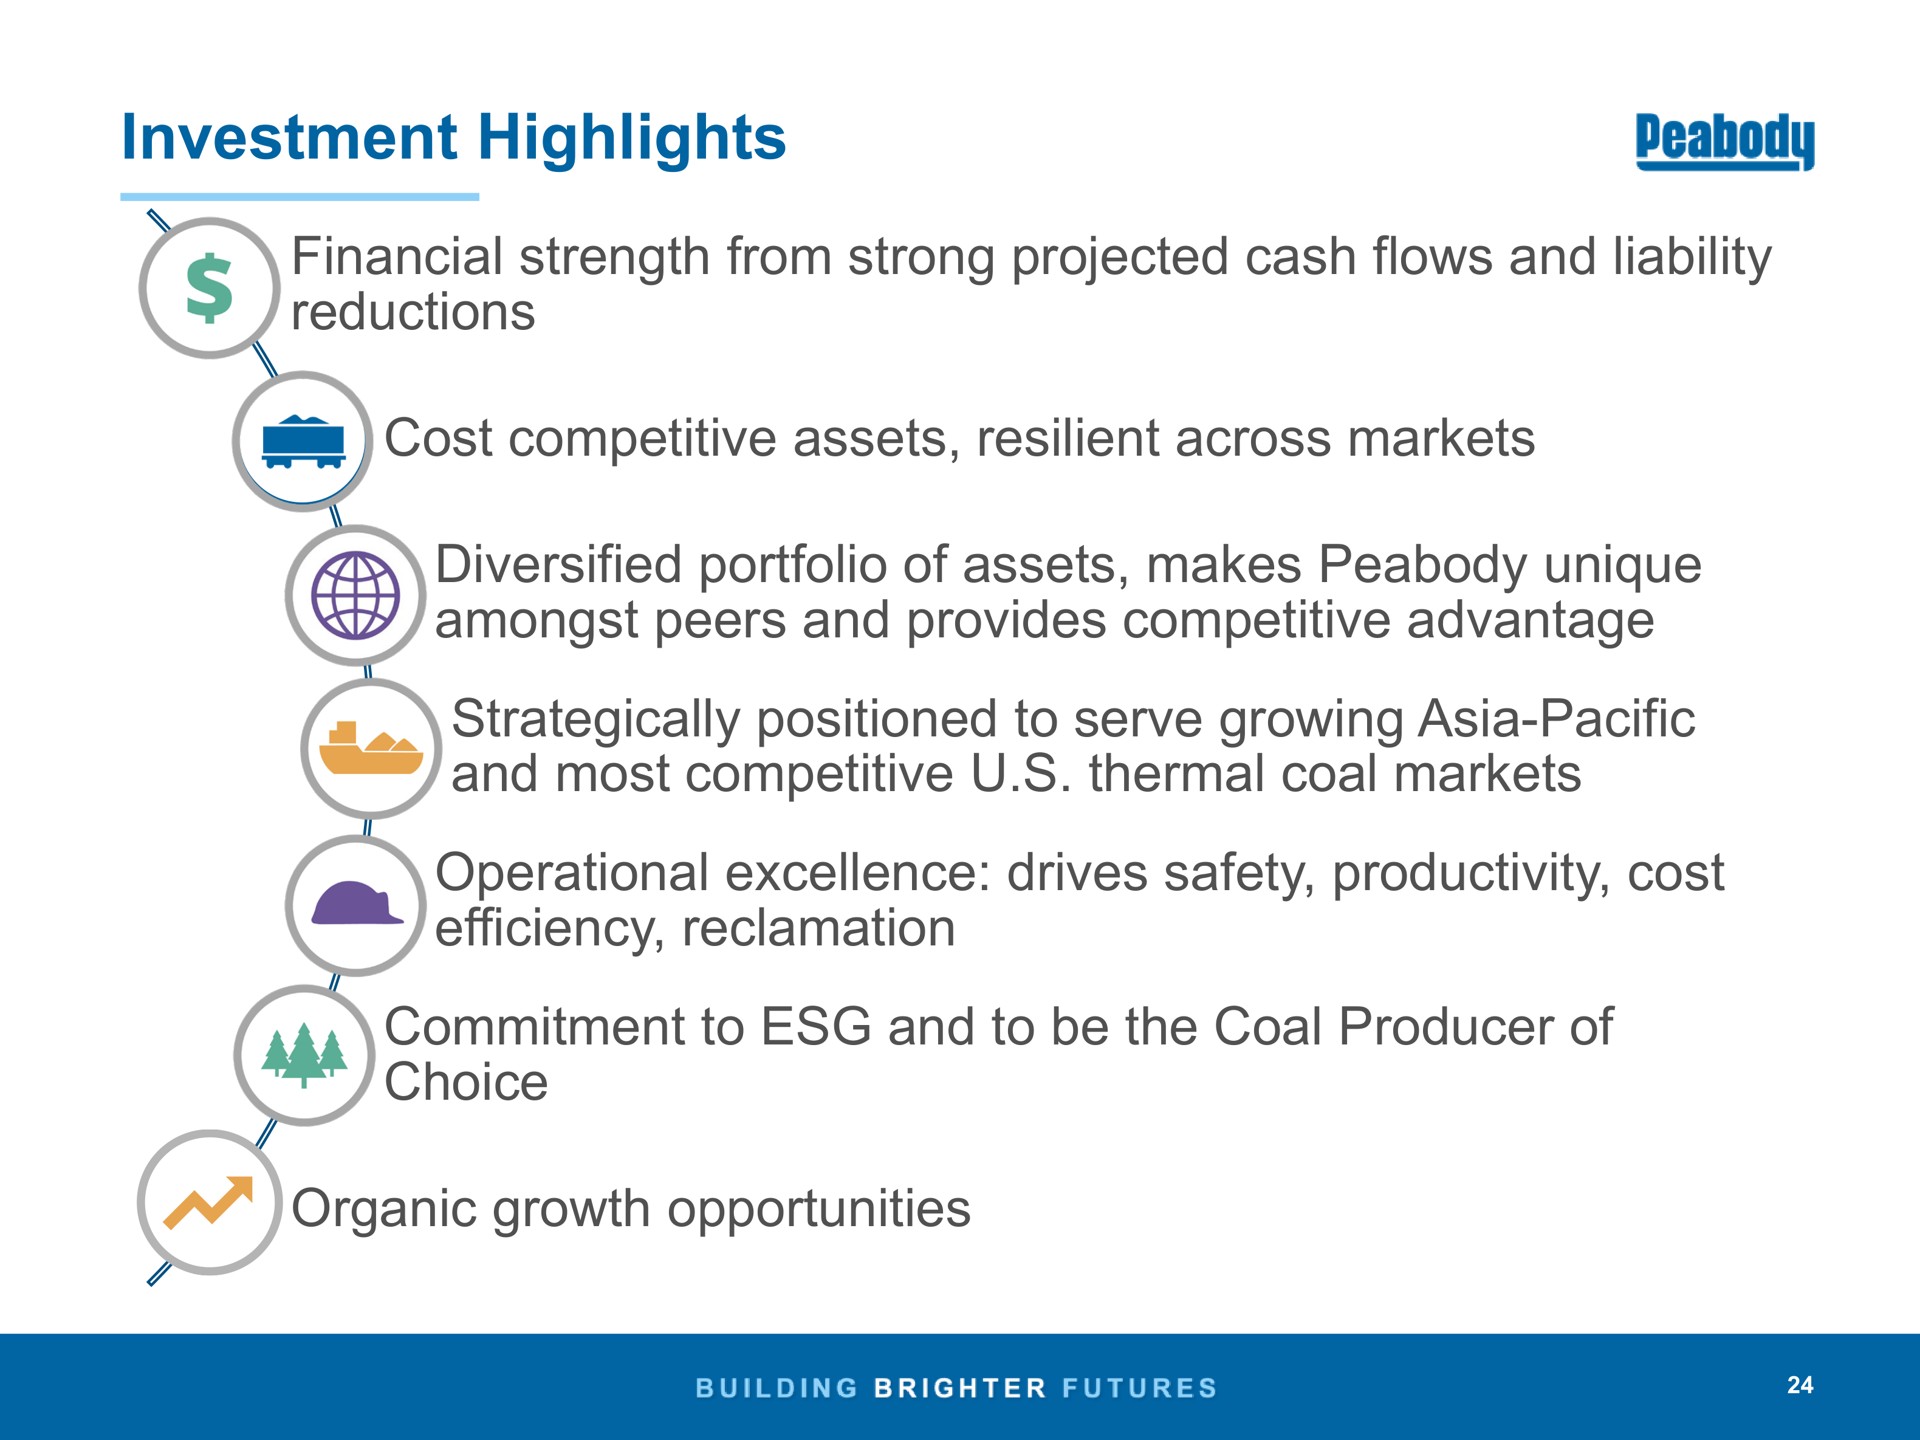 investment highlights financial strength from strong projected cash flows and liability reductions cost competitive assets resilient across markets diversified portfolio of assets makes unique amongst peers and provides competitive advantage strategically positioned to serve growing pacific and most competitive thermal coal markets operational excellence drives safety productivity cost efficiency reclamation commitment to and to be the coal producer of choice organic growth opportunities | Peabody Energy